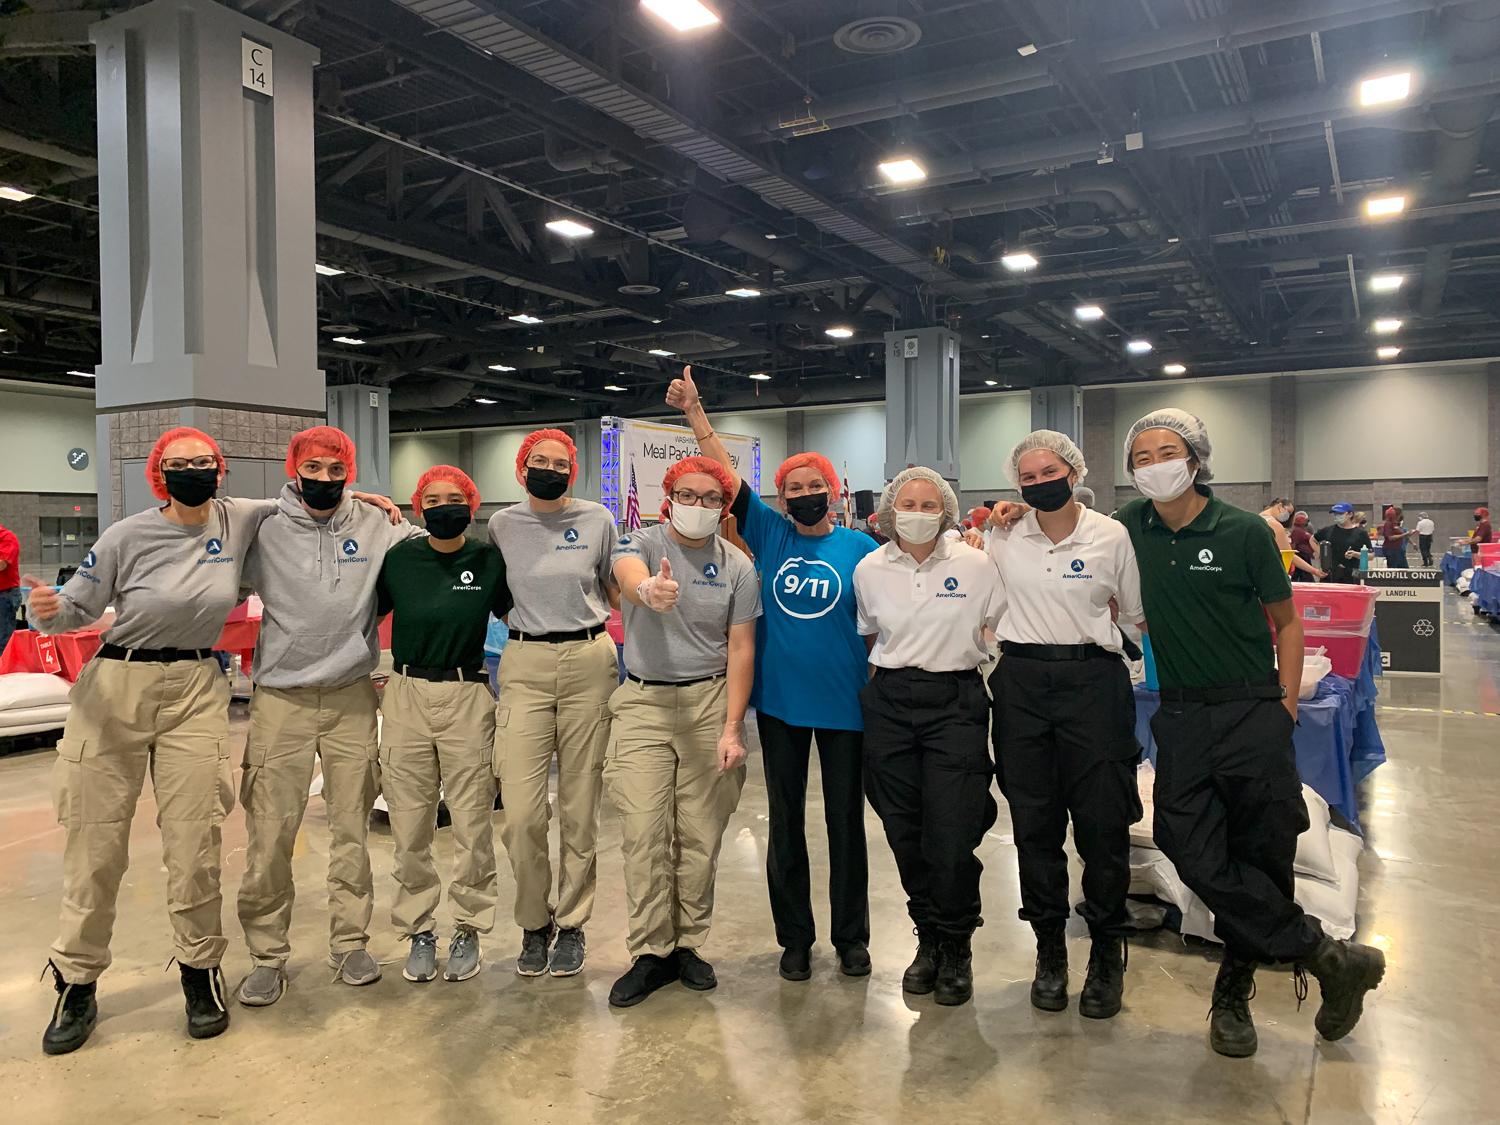 AmeriCorps members and volunteers smiling on 9/11 Day at a food packing event.